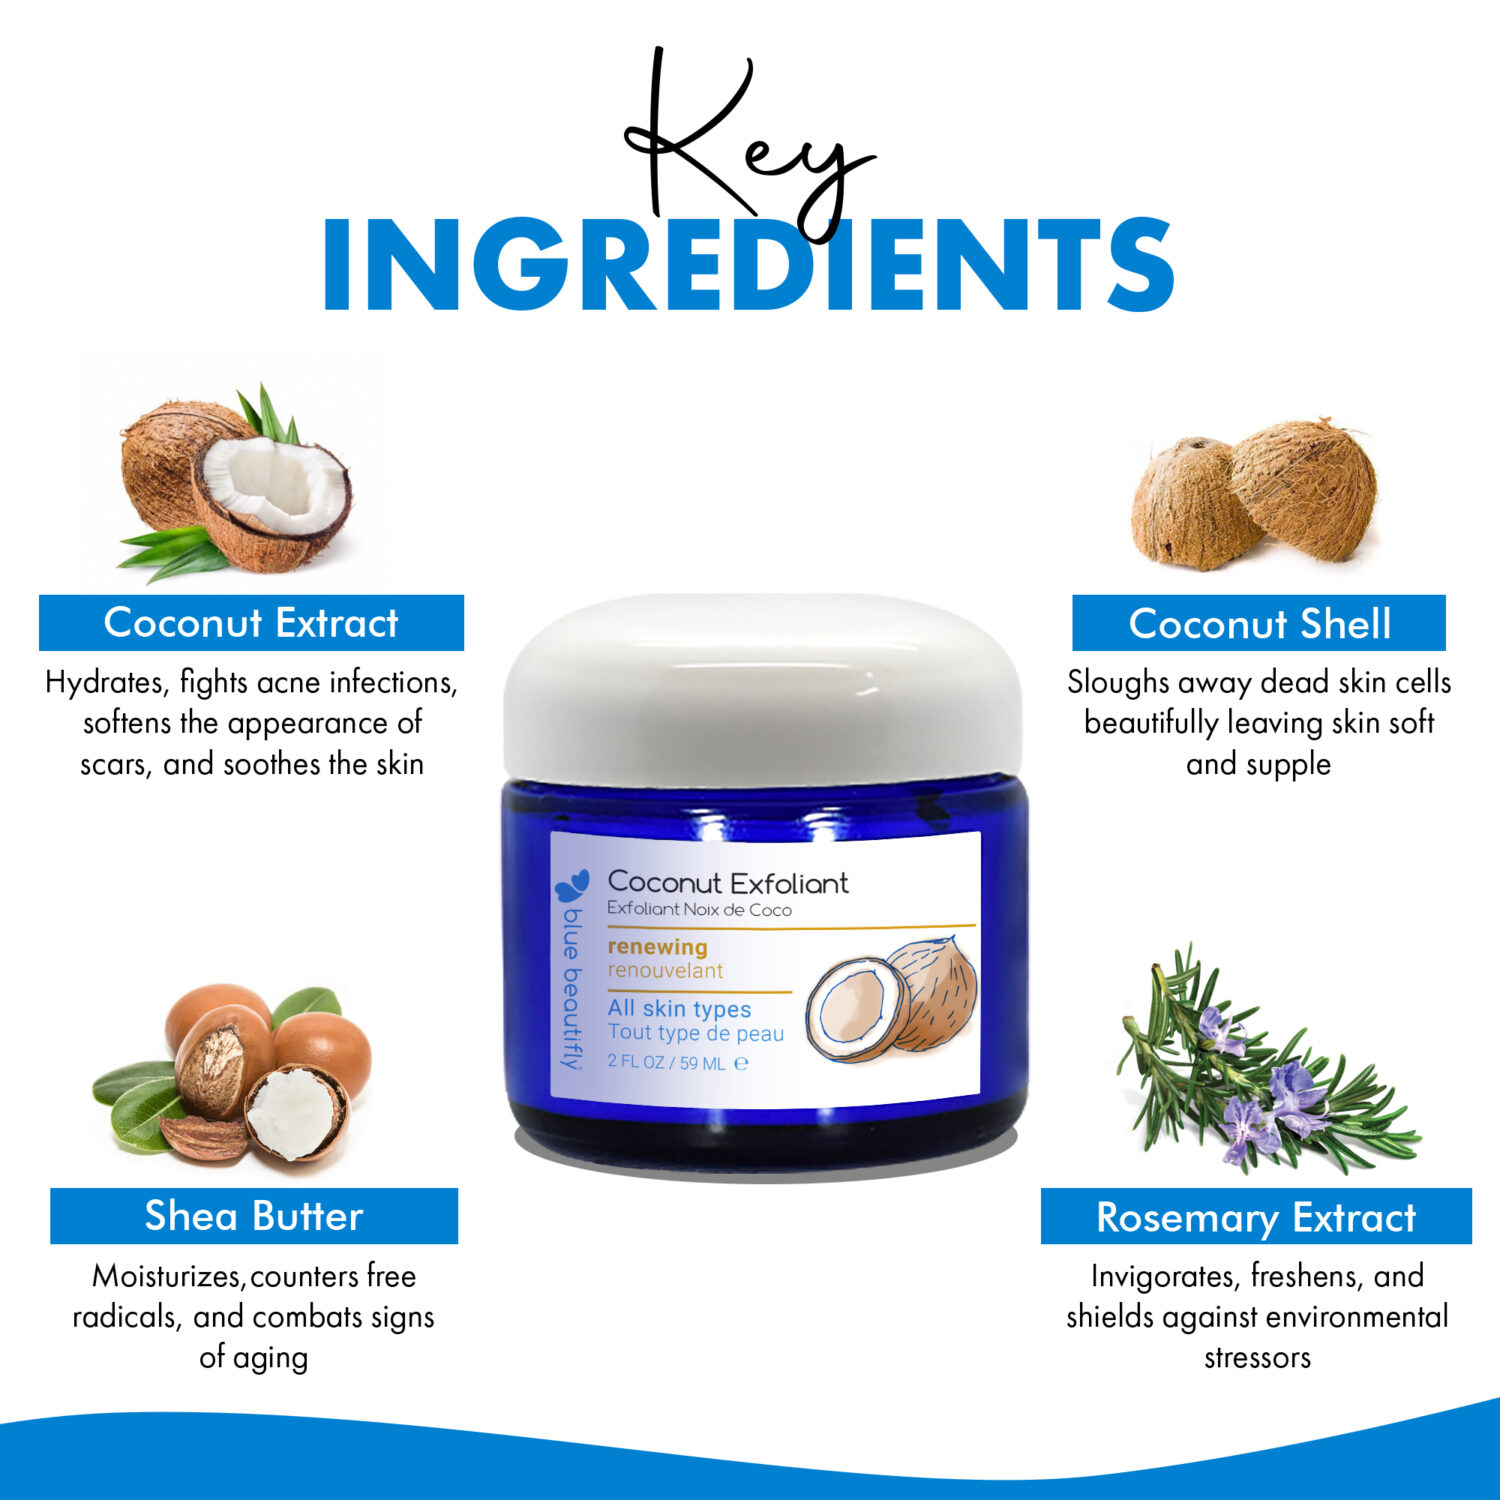 Blue Beautifly Coconut Exfoliant - Key ingredients are Coconut Extract, Coconut shell granules, shea butter, and rosemary extract